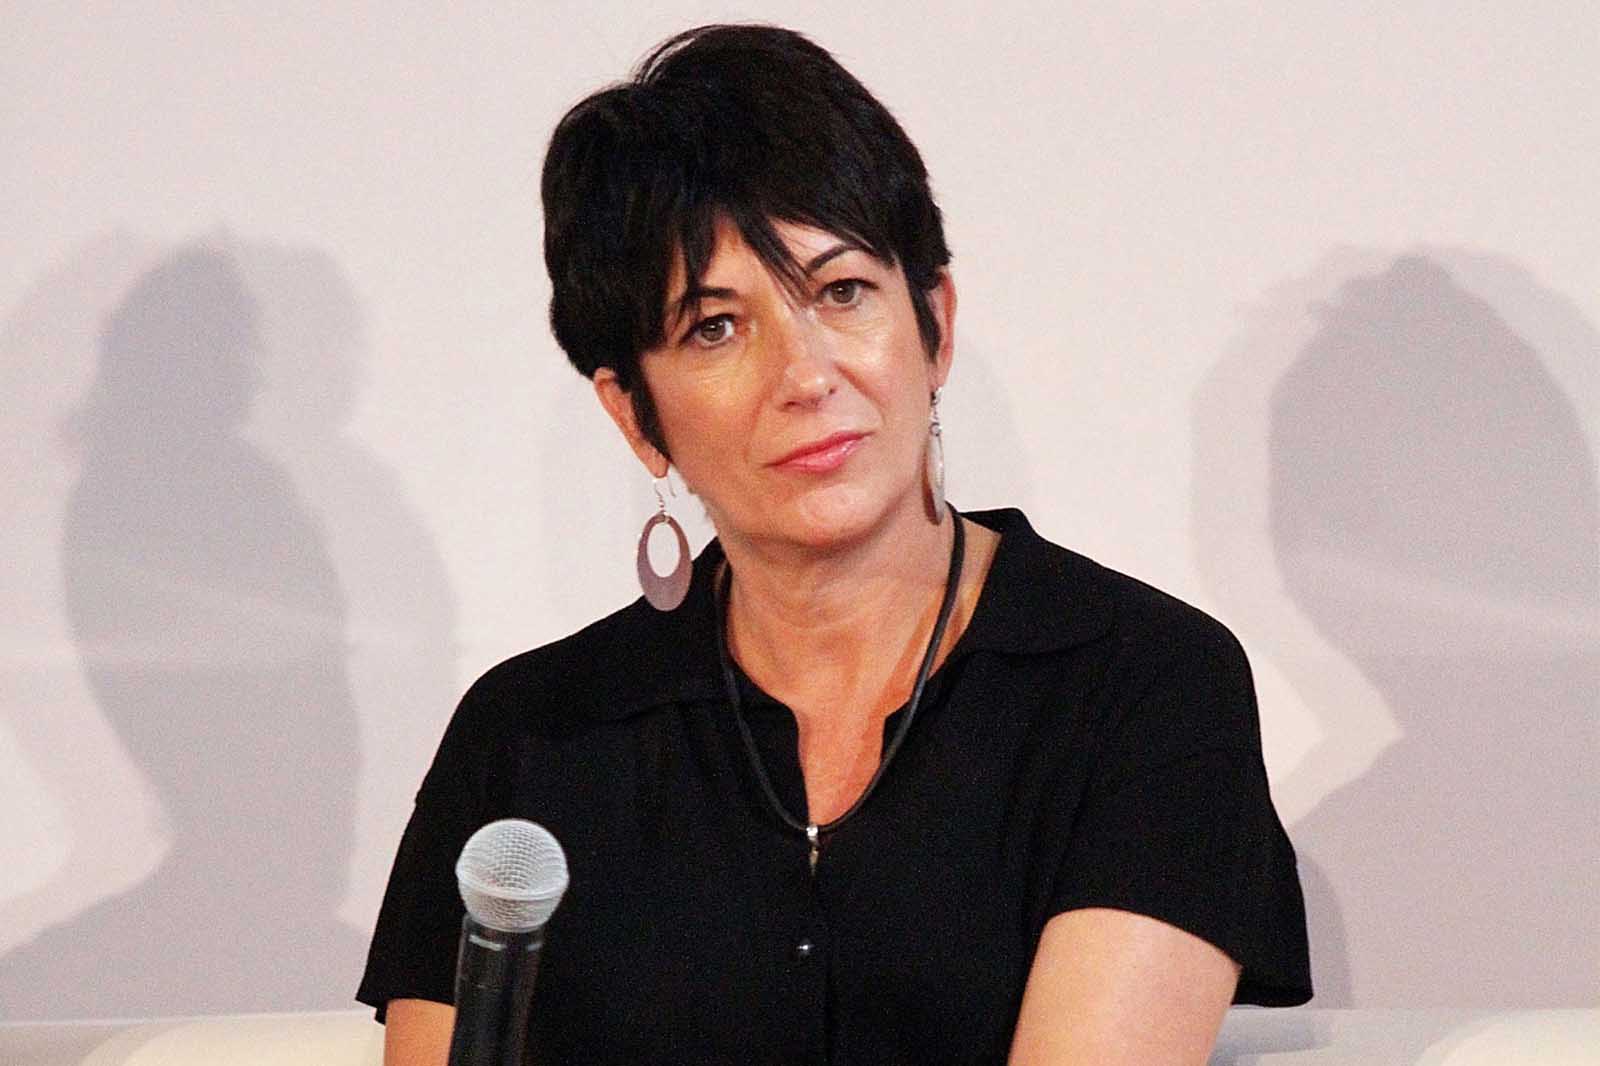 Ghislaine Maxwell has been complaining about her prison life conditions, but it turns out, her poor treatment may be because the U.S. is protecting her.